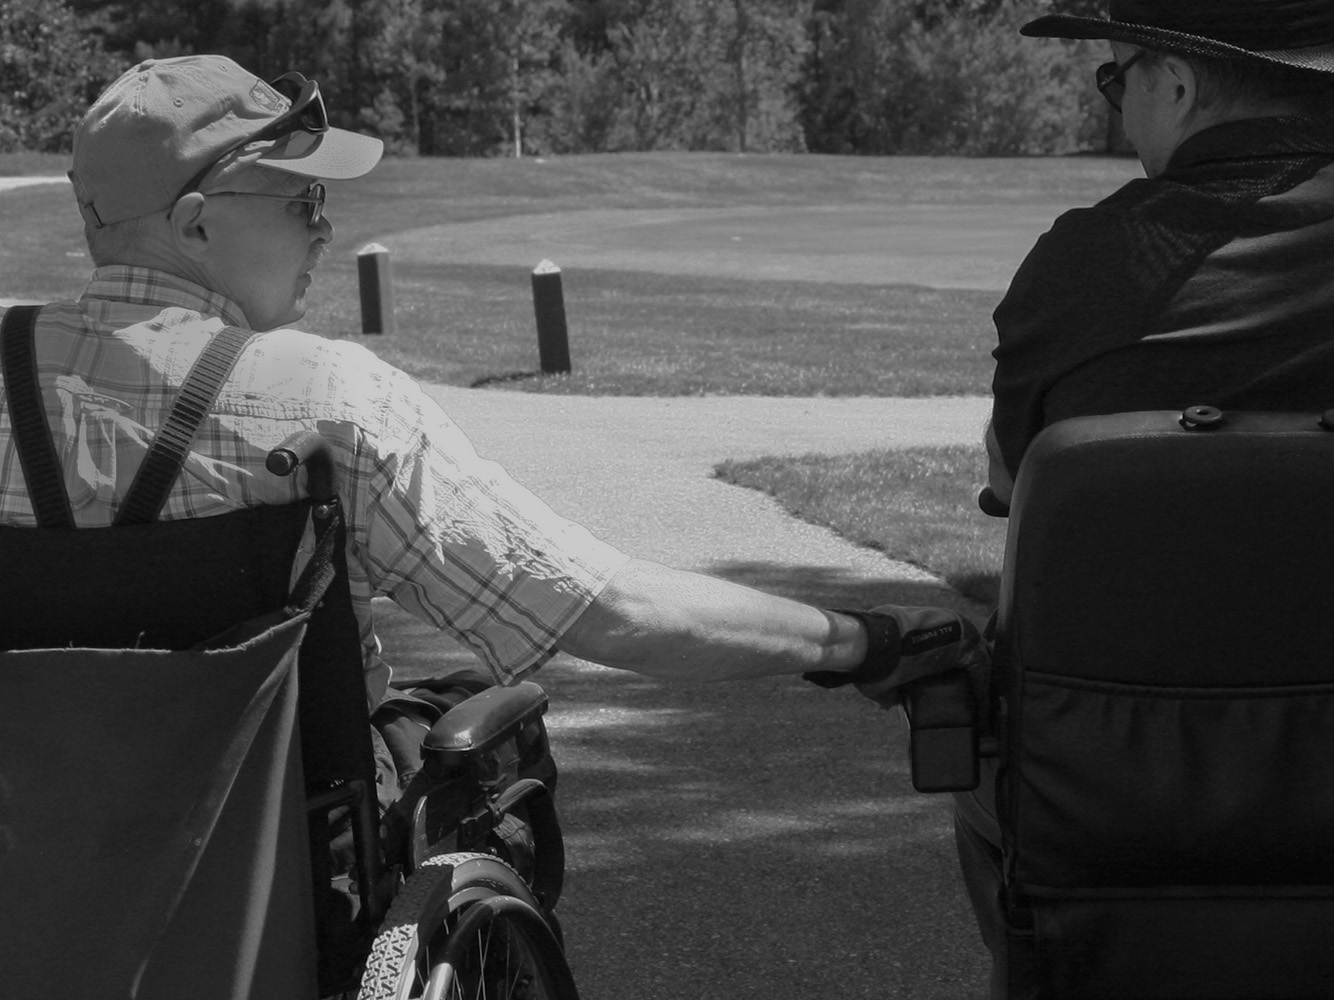 men in wheelchairs on golf course